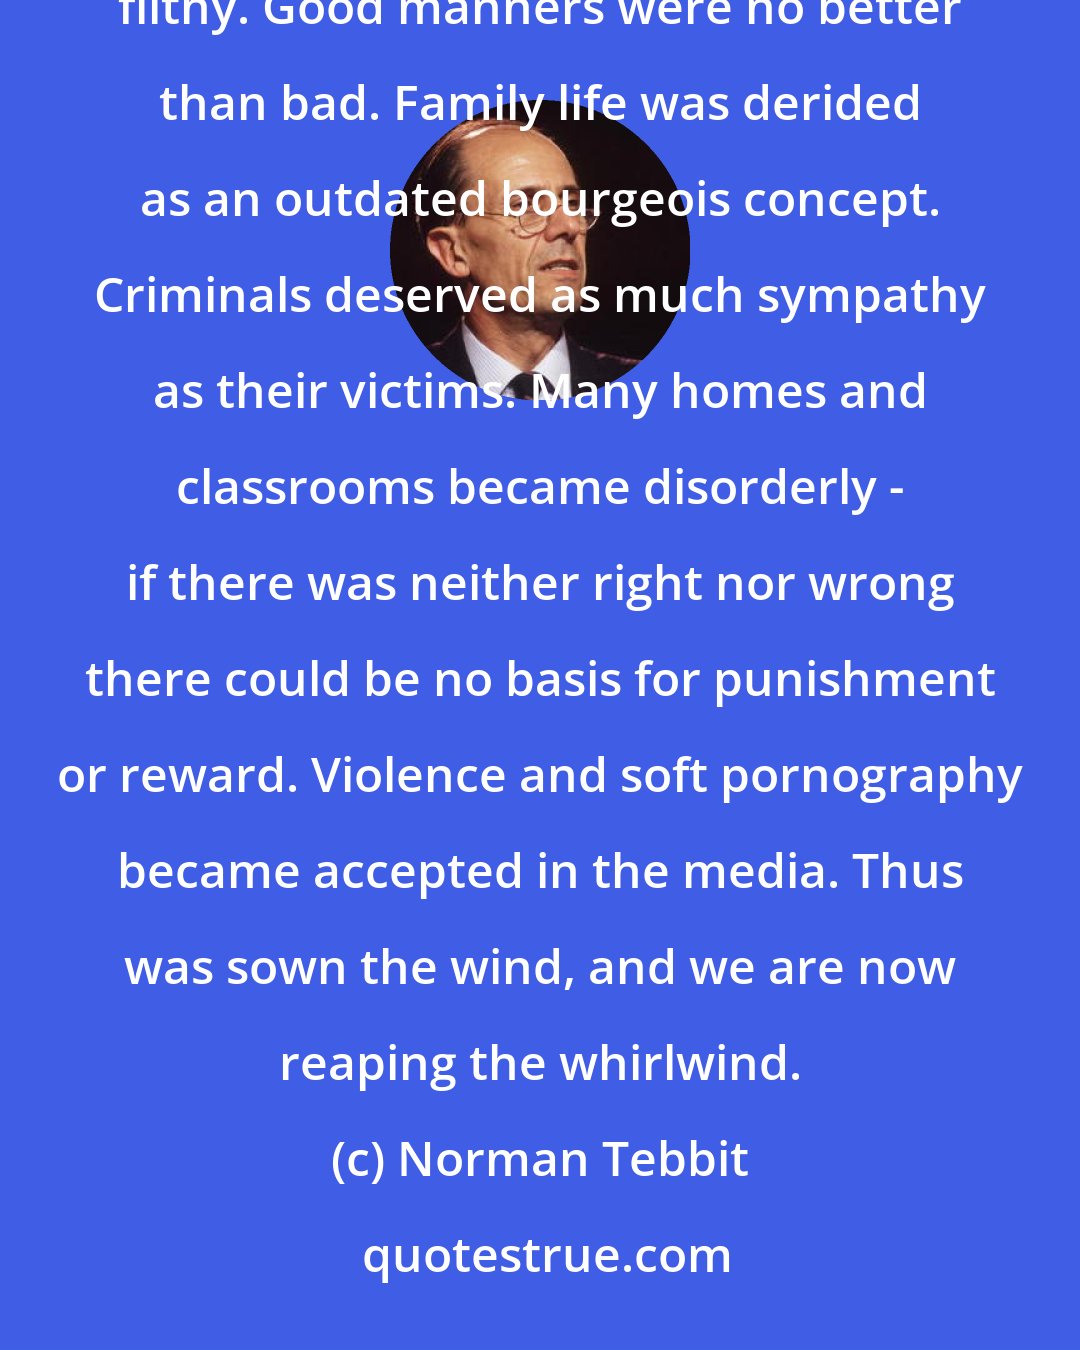 Norman Tebbit: Bad art was as good as good art. Grammar and spelling were no longer important. To be clean was no better than to be filthy. Good manners were no better than bad. Family life was derided as an outdated bourgeois concept. Criminals deserved as much sympathy as their victims. Many homes and classrooms became disorderly - if there was neither right nor wrong there could be no basis for punishment or reward. Violence and soft pornography became accepted in the media. Thus was sown the wind, and we are now reaping the whirlwind.